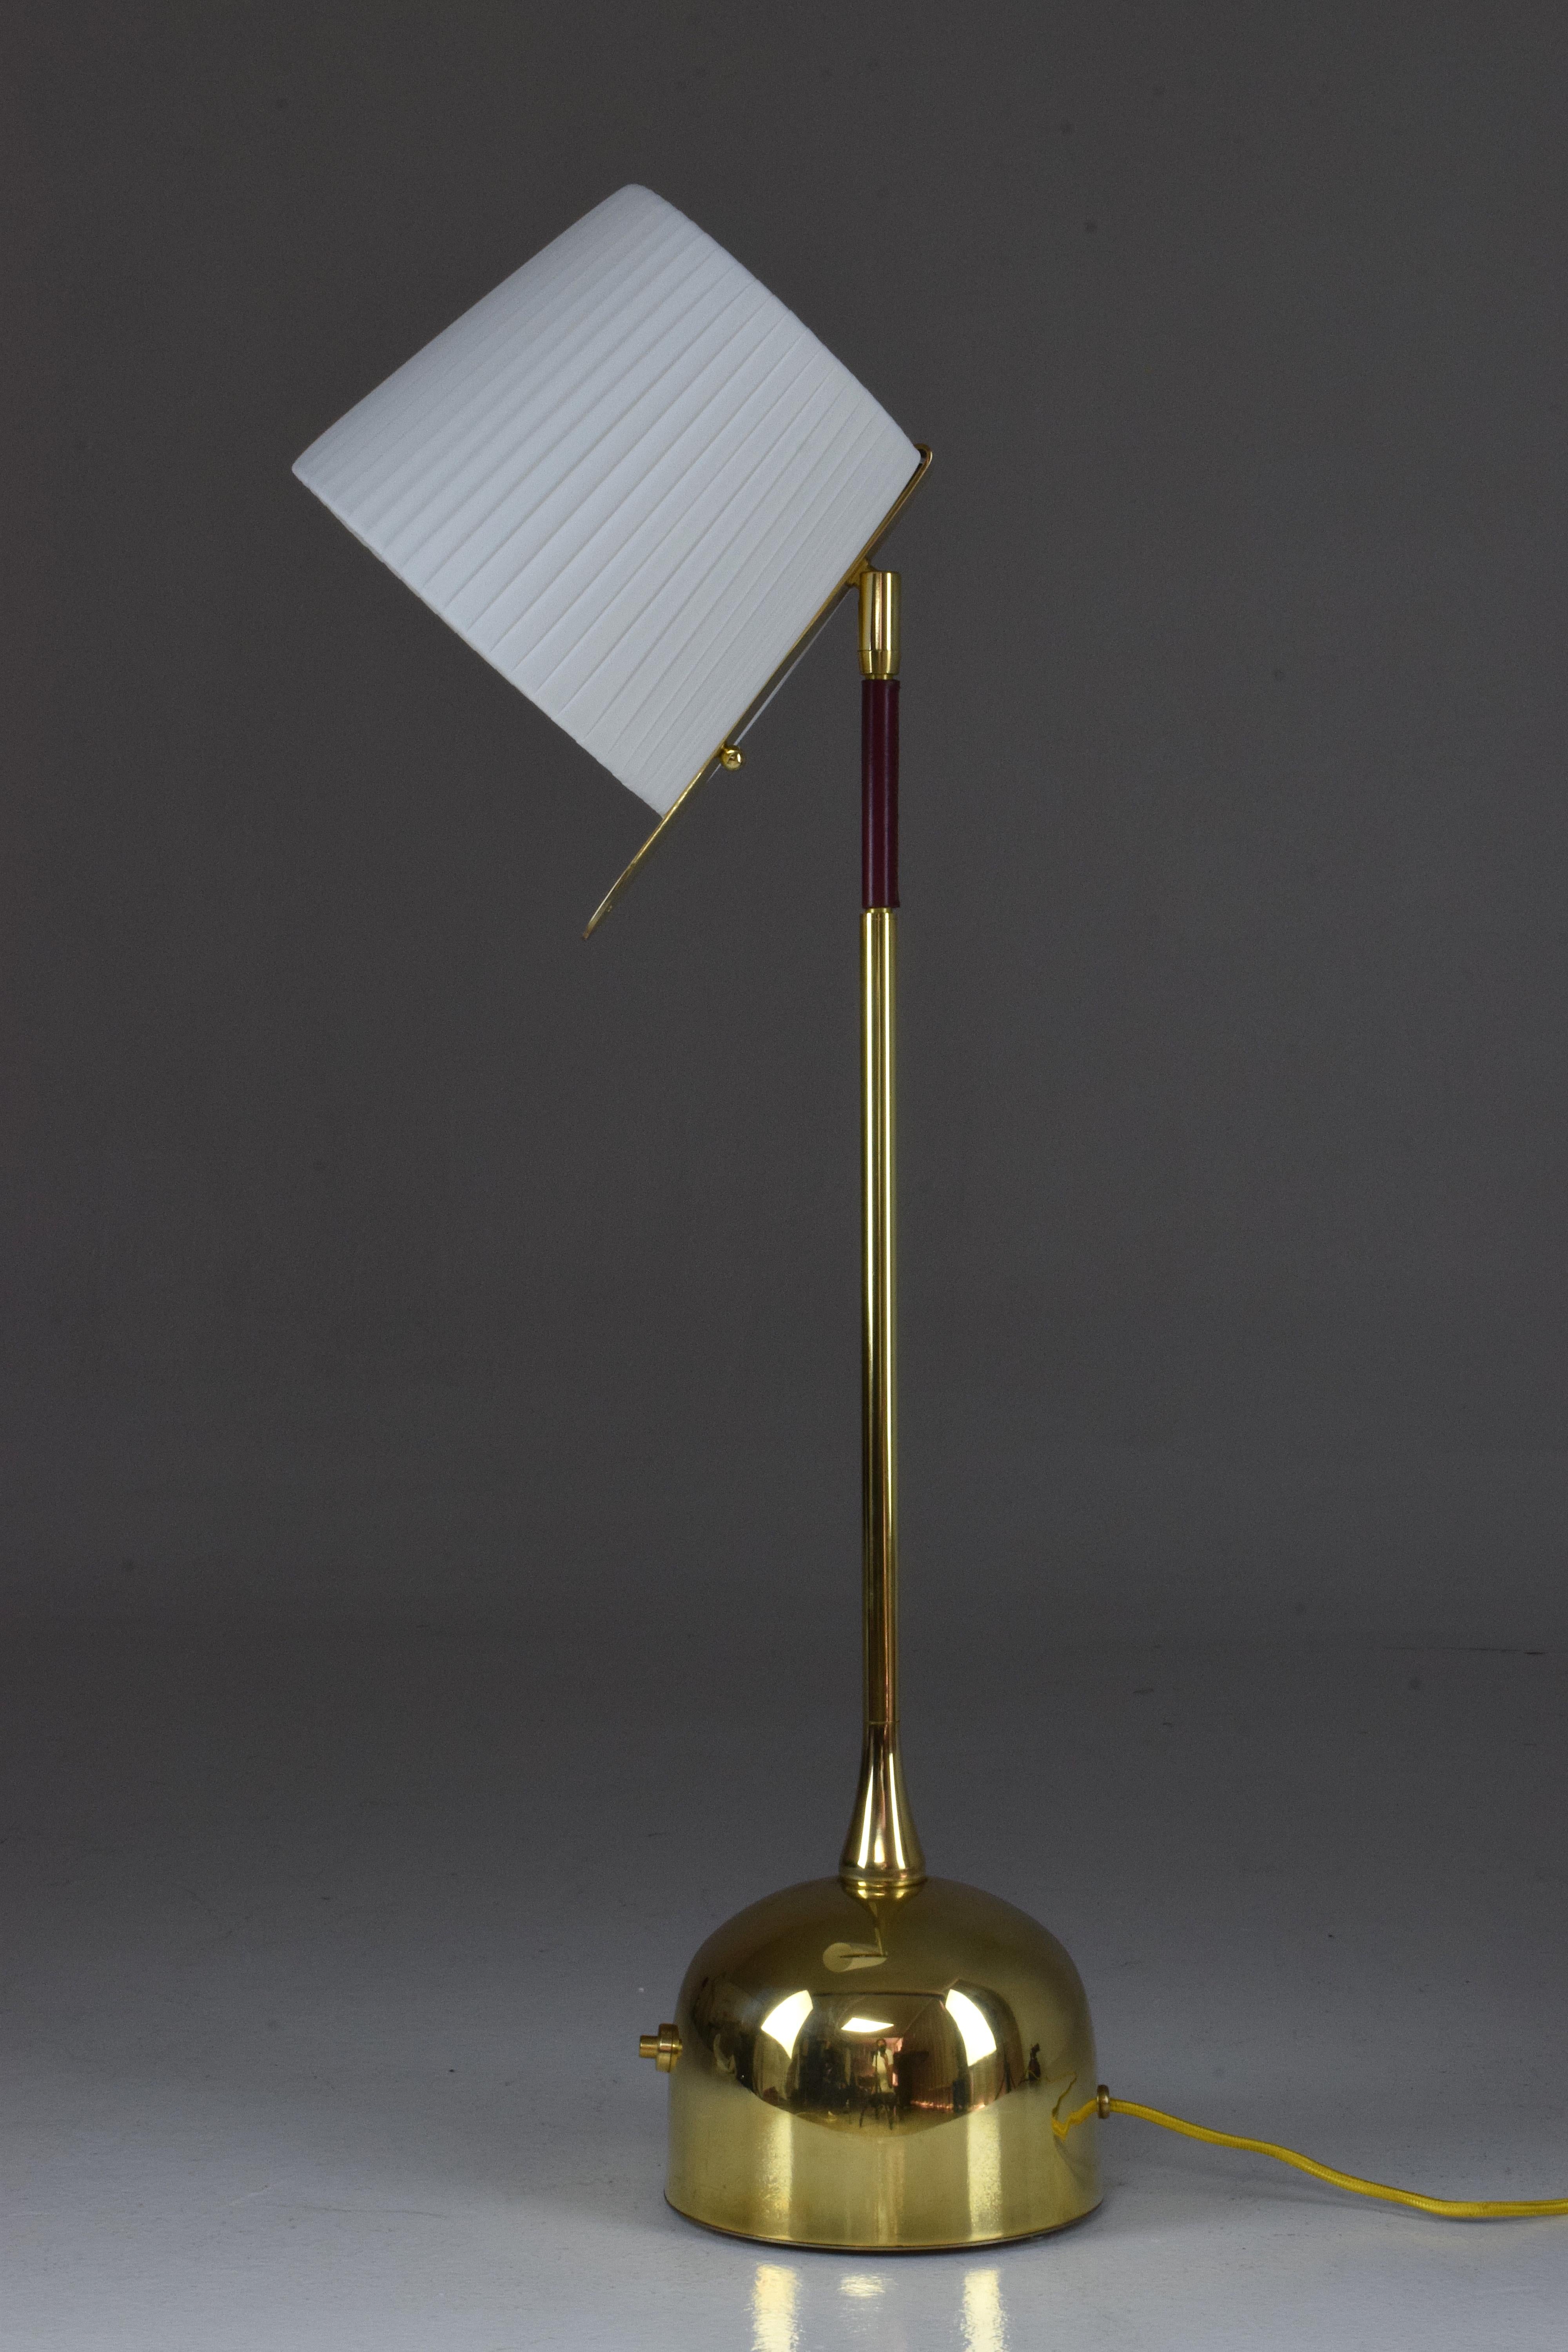 Contemporary handcrafted articulating table lamp pictured in a solid polished brass finish, adorned with a dark red hand-sewn sheathed leather detail by artisan saddle makers. The lamp is designed with our signature pear shaped joint and the